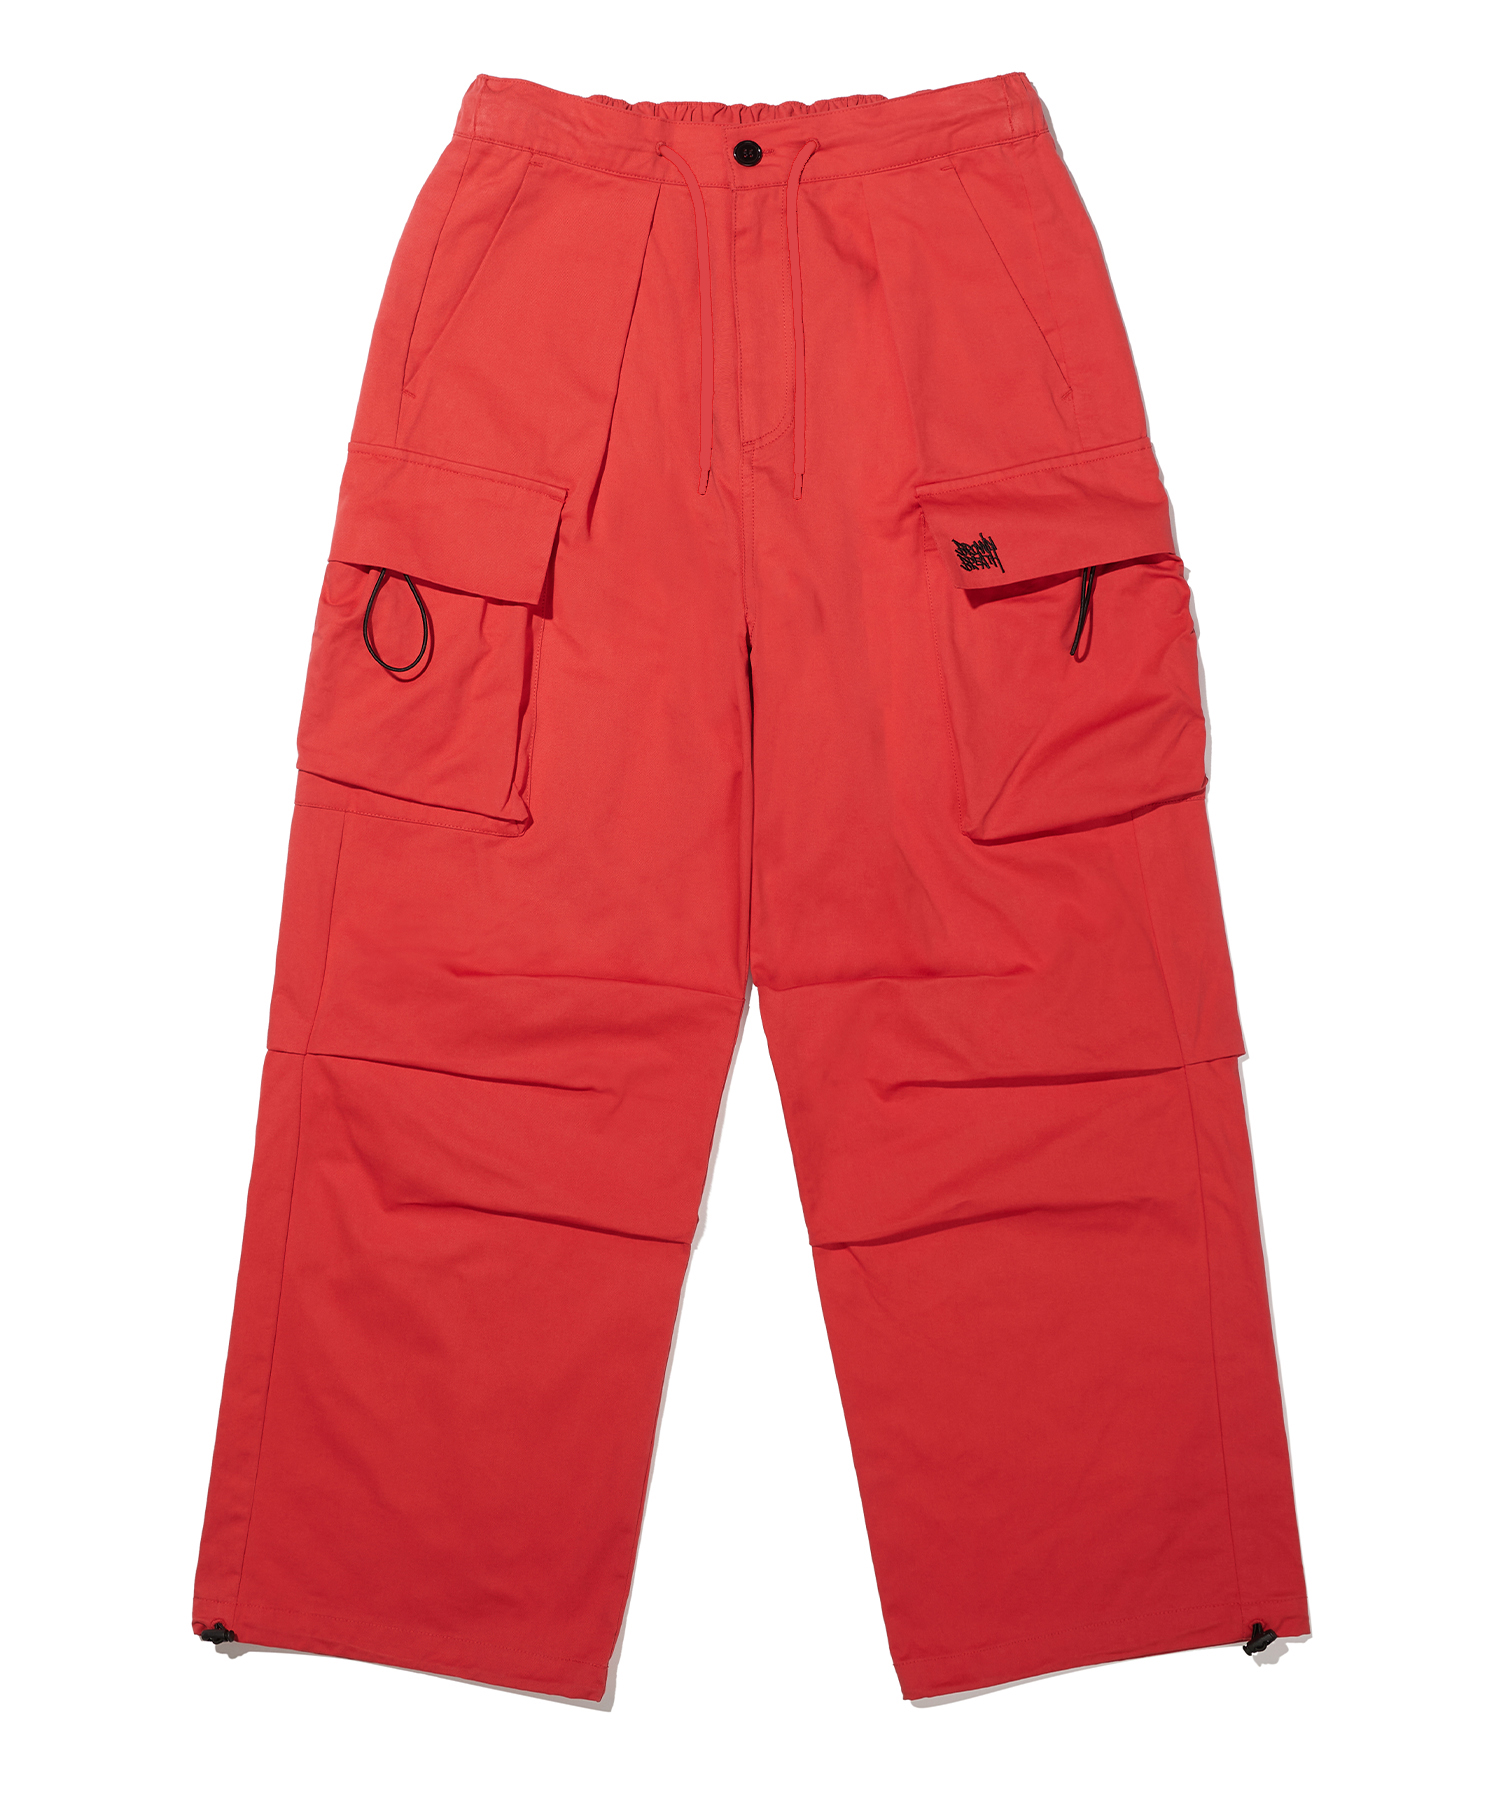 W UTILITY CARGO PANTS EP2 - RED brownbreath